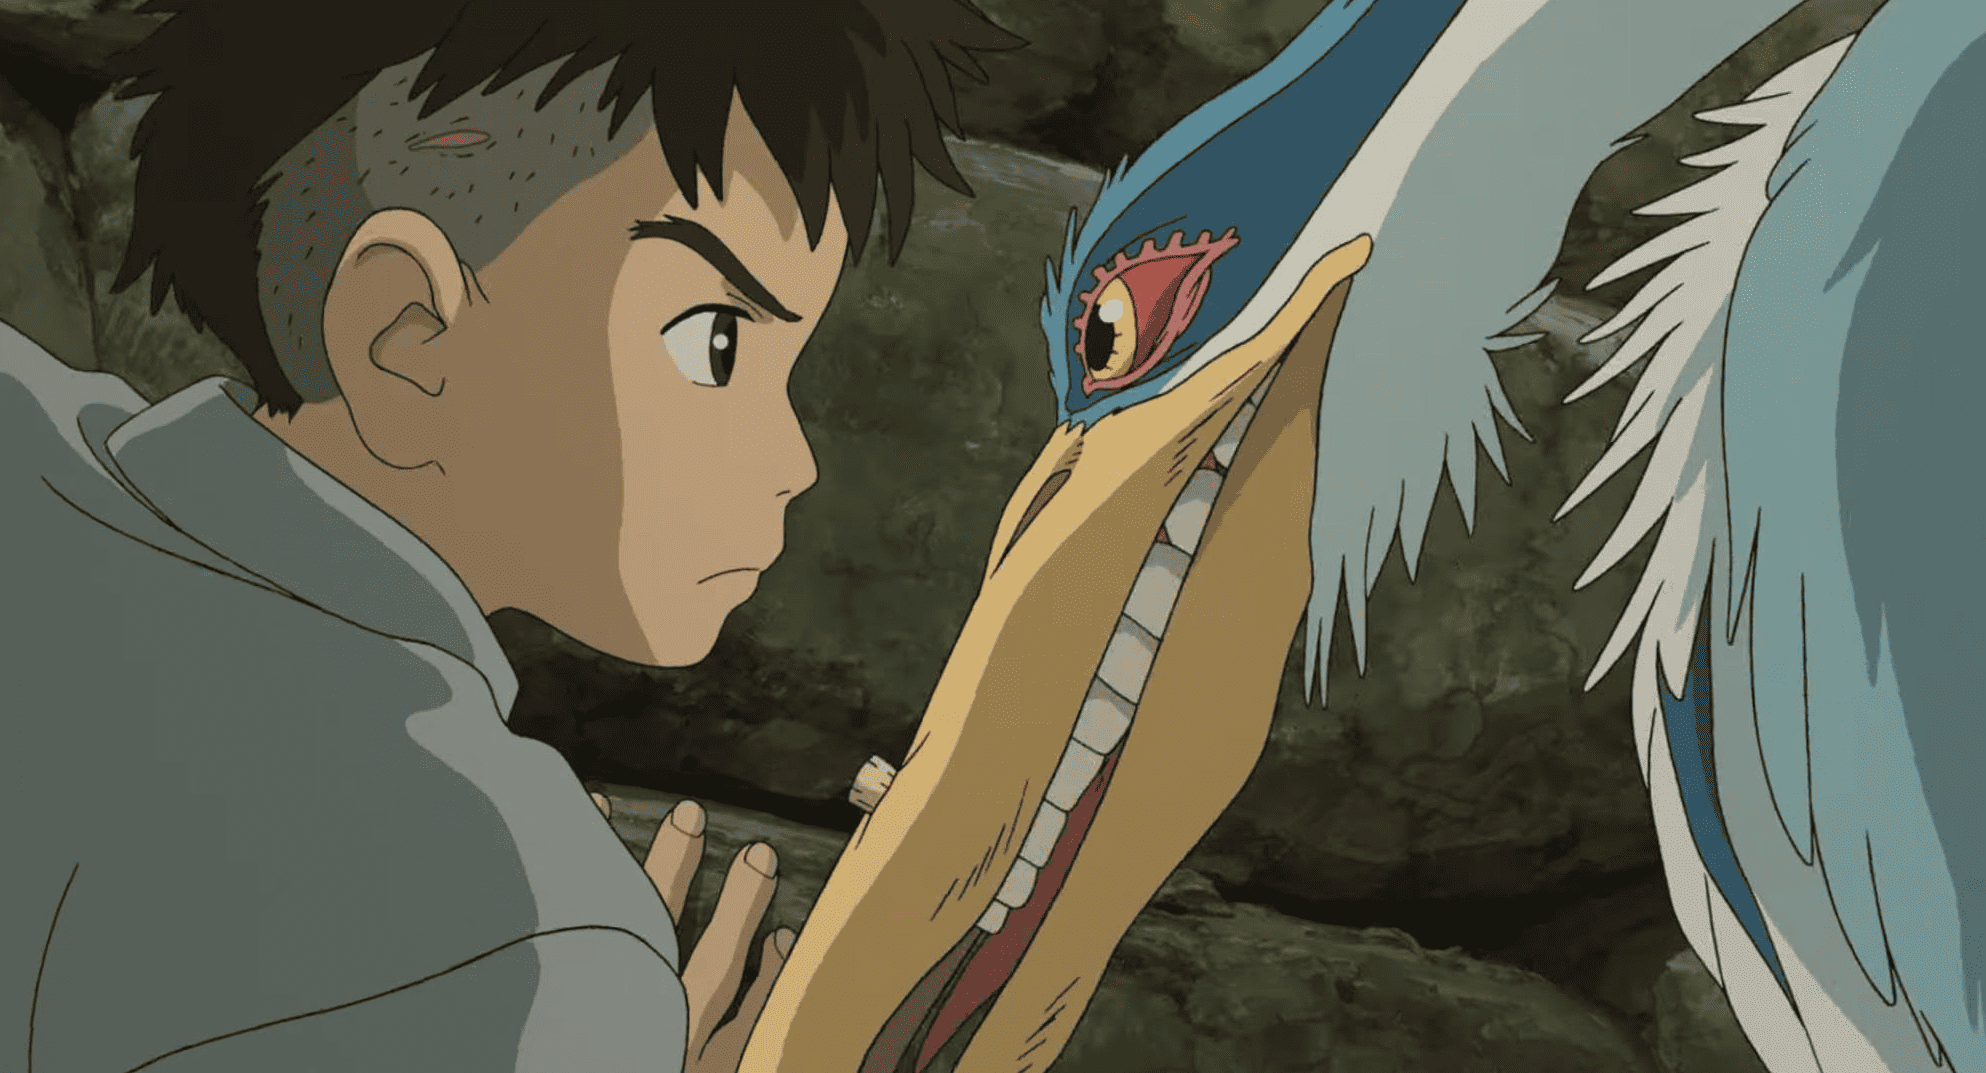 An animated boy and a heron glare into each other's eyes in this image from Studio Ghibli.